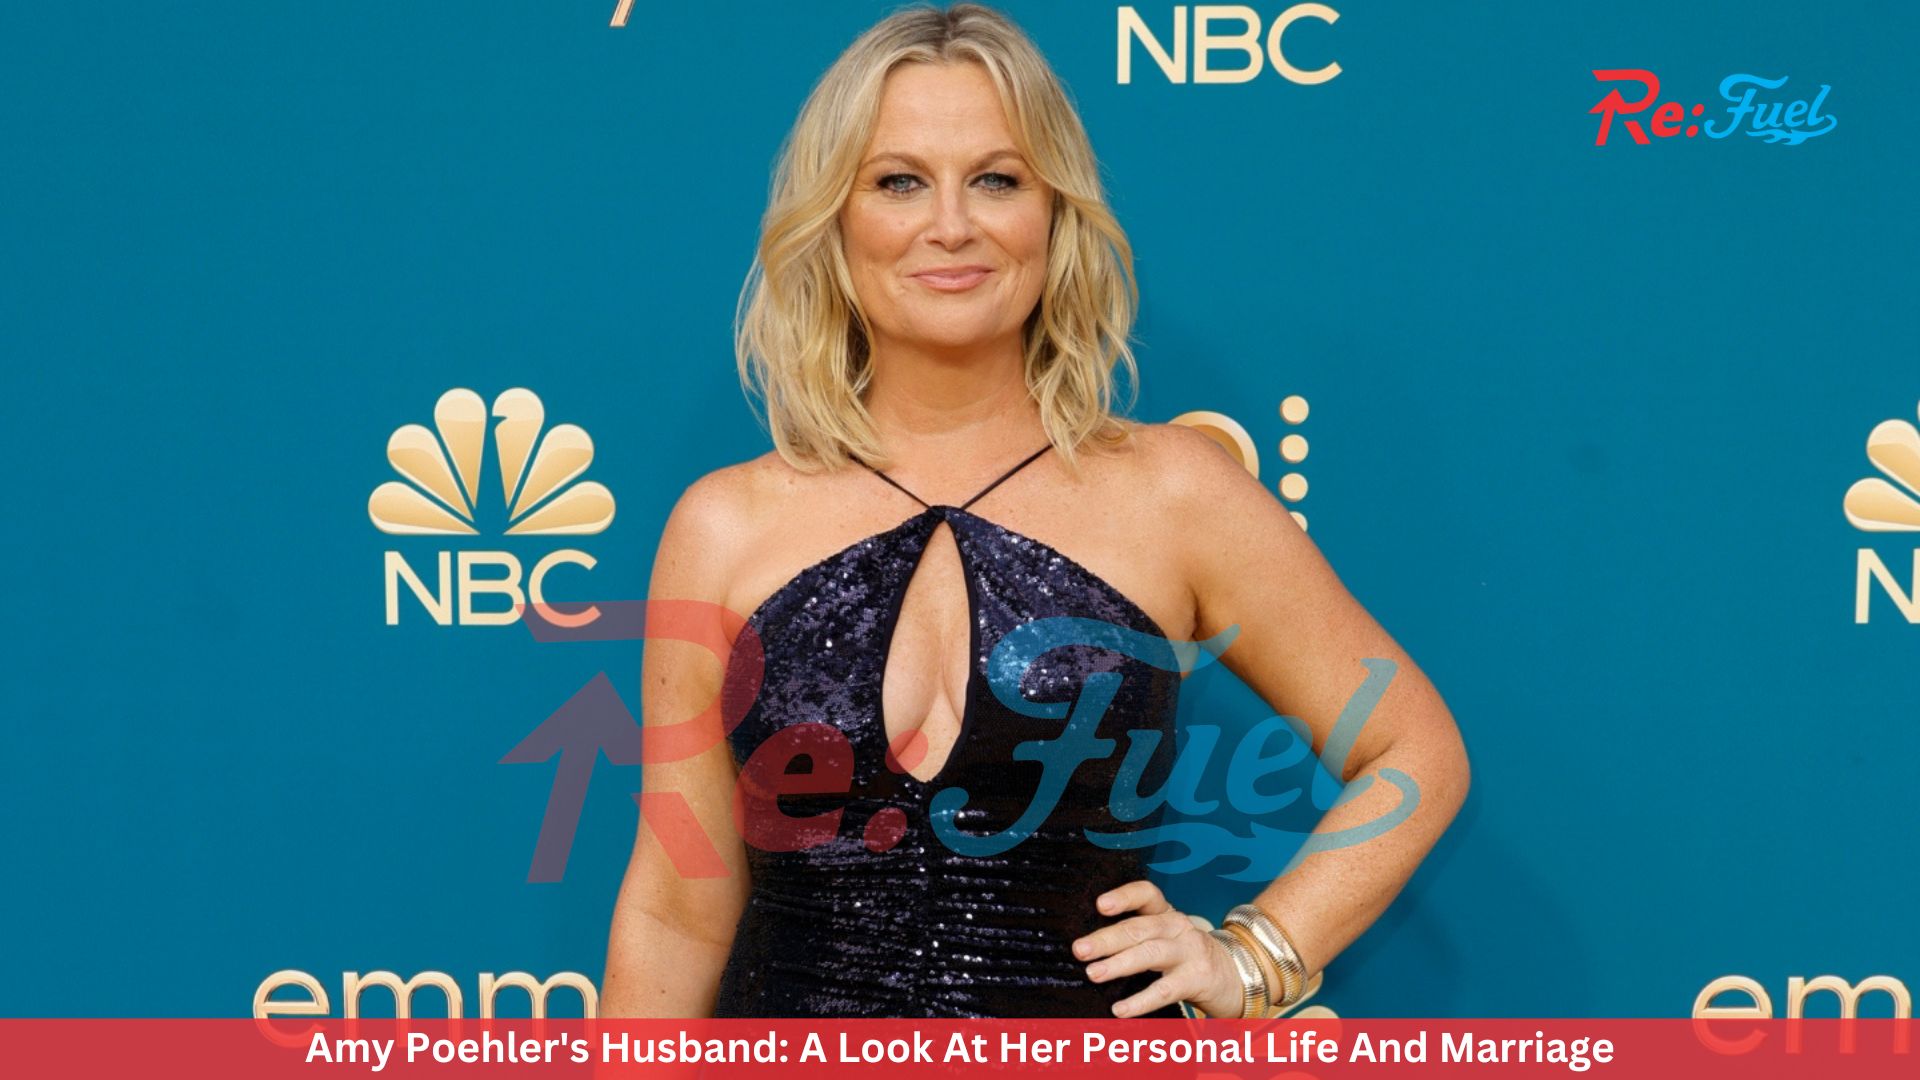 Amy Poehler's Husband: A Look At Her Personal Life And Marriage